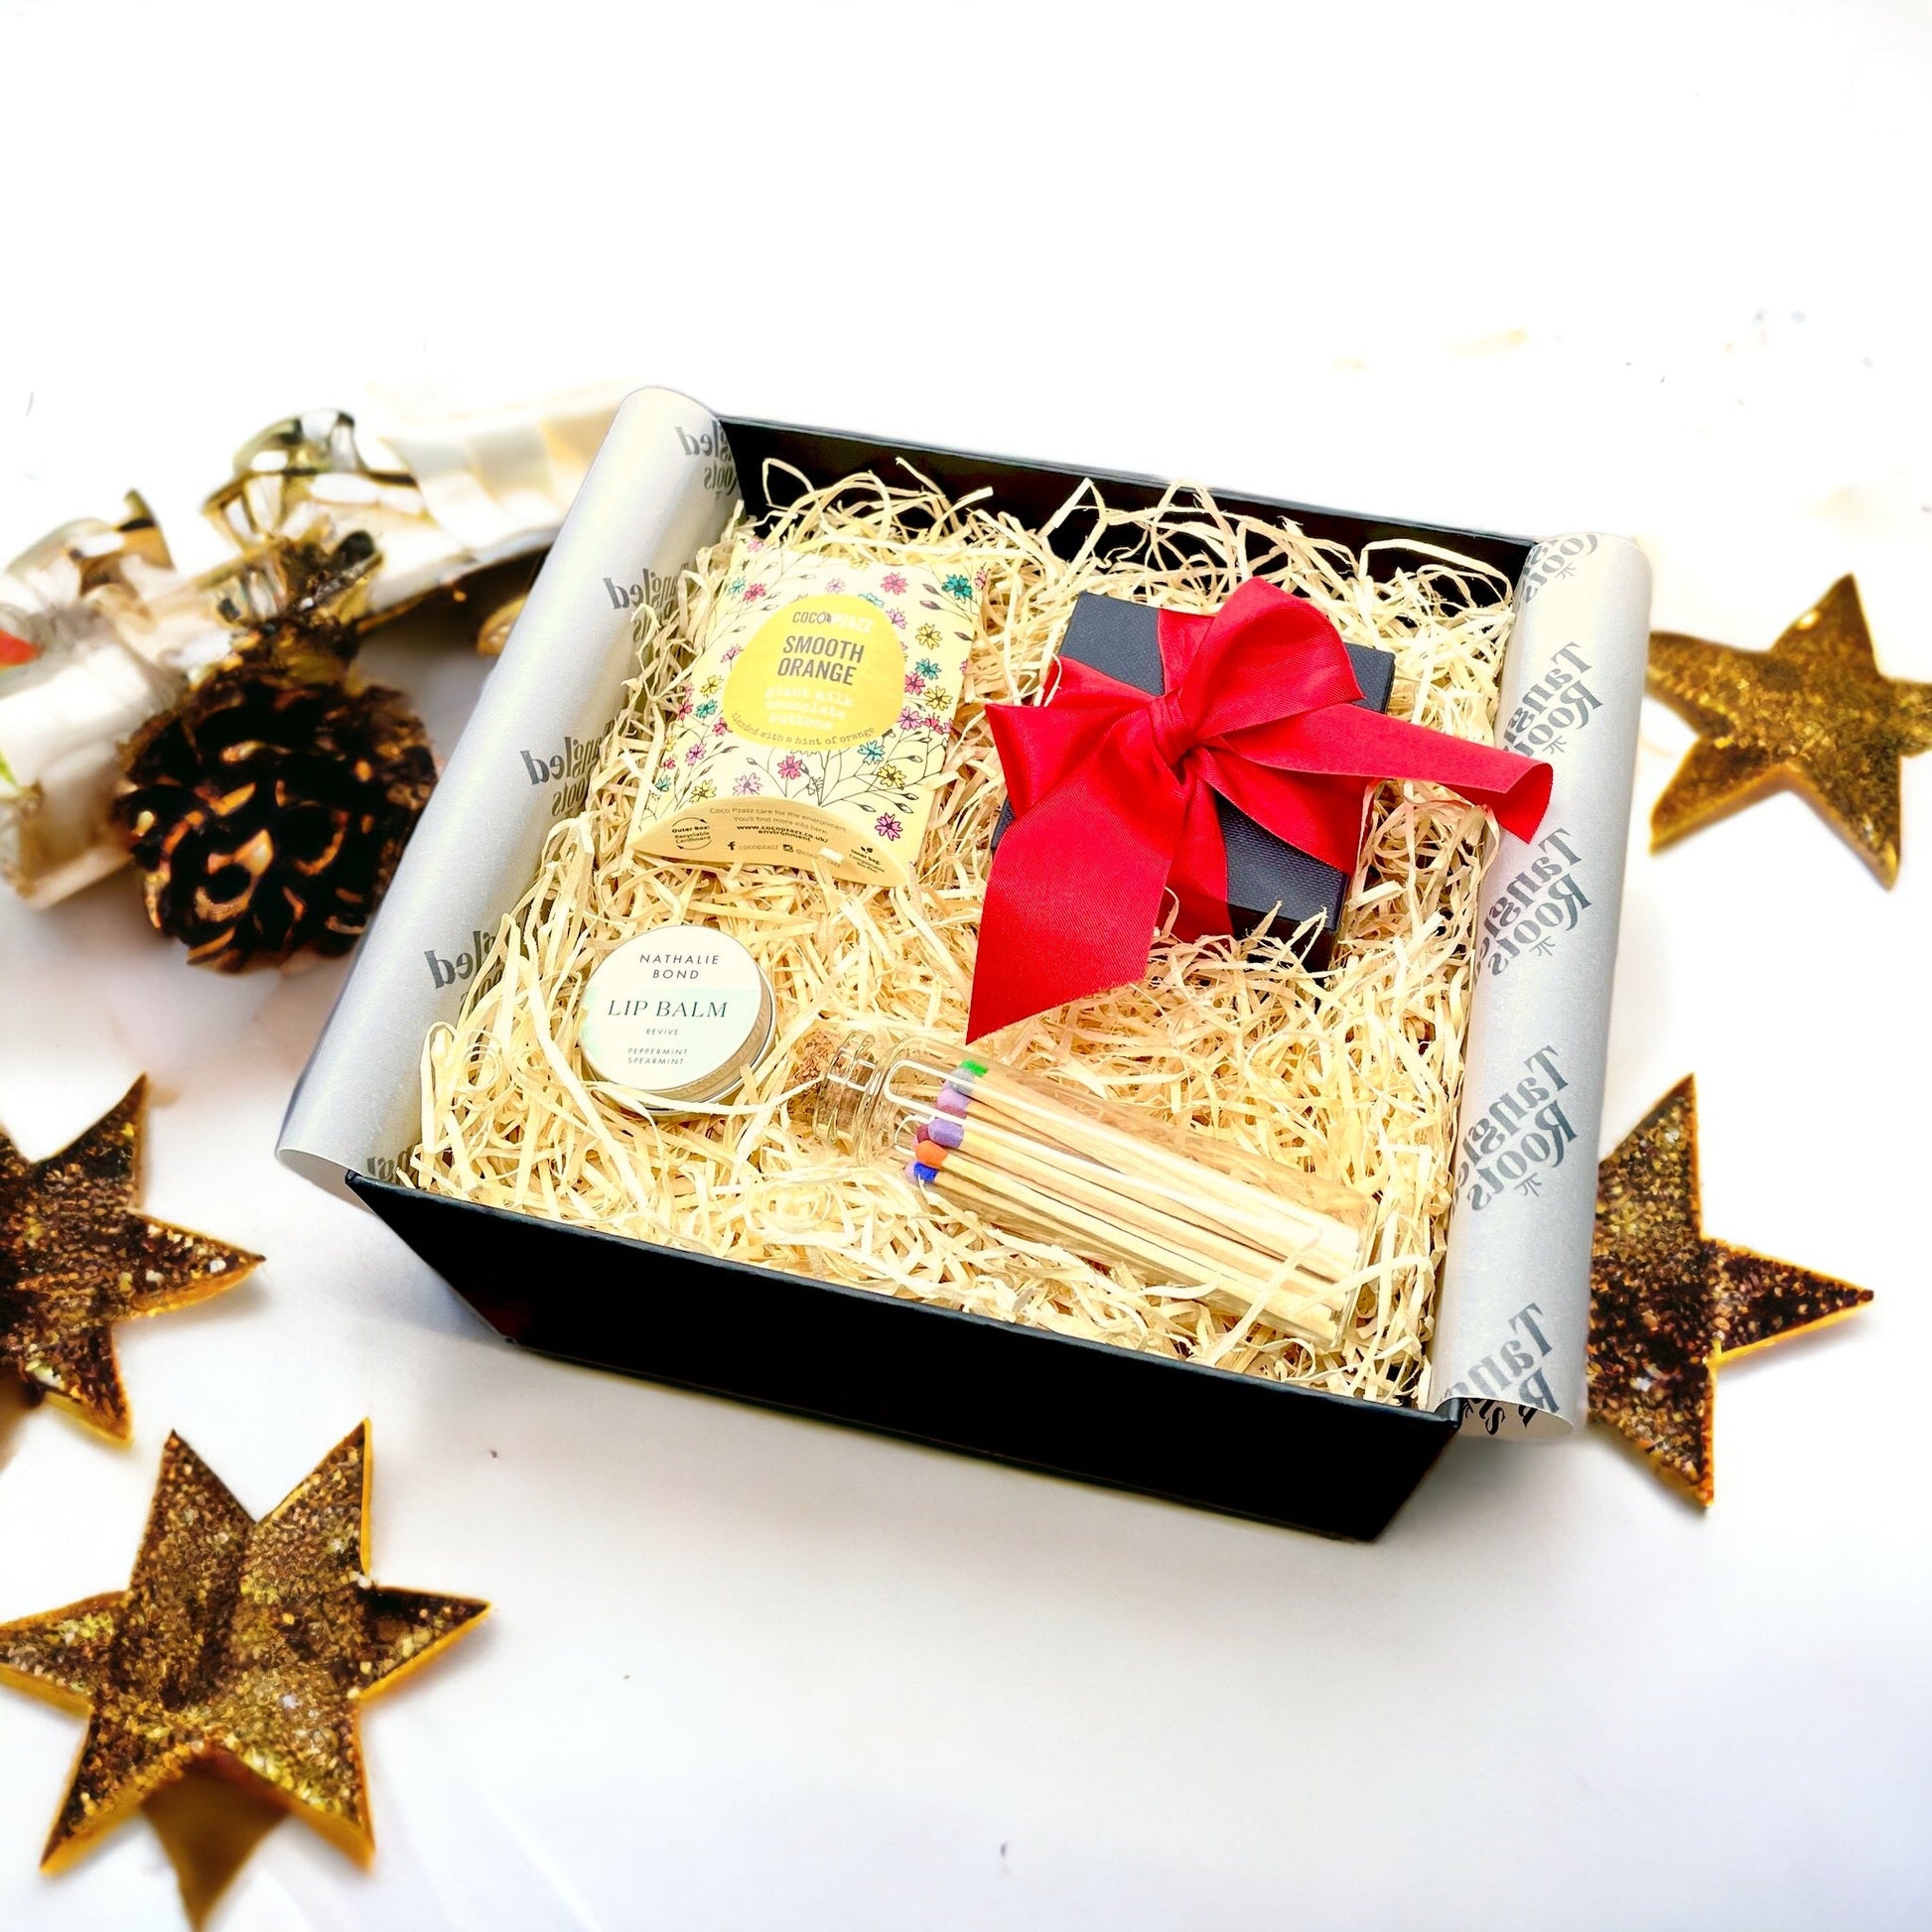 Christmas Candle Gift Hamper for Her - Tangledroots.shop